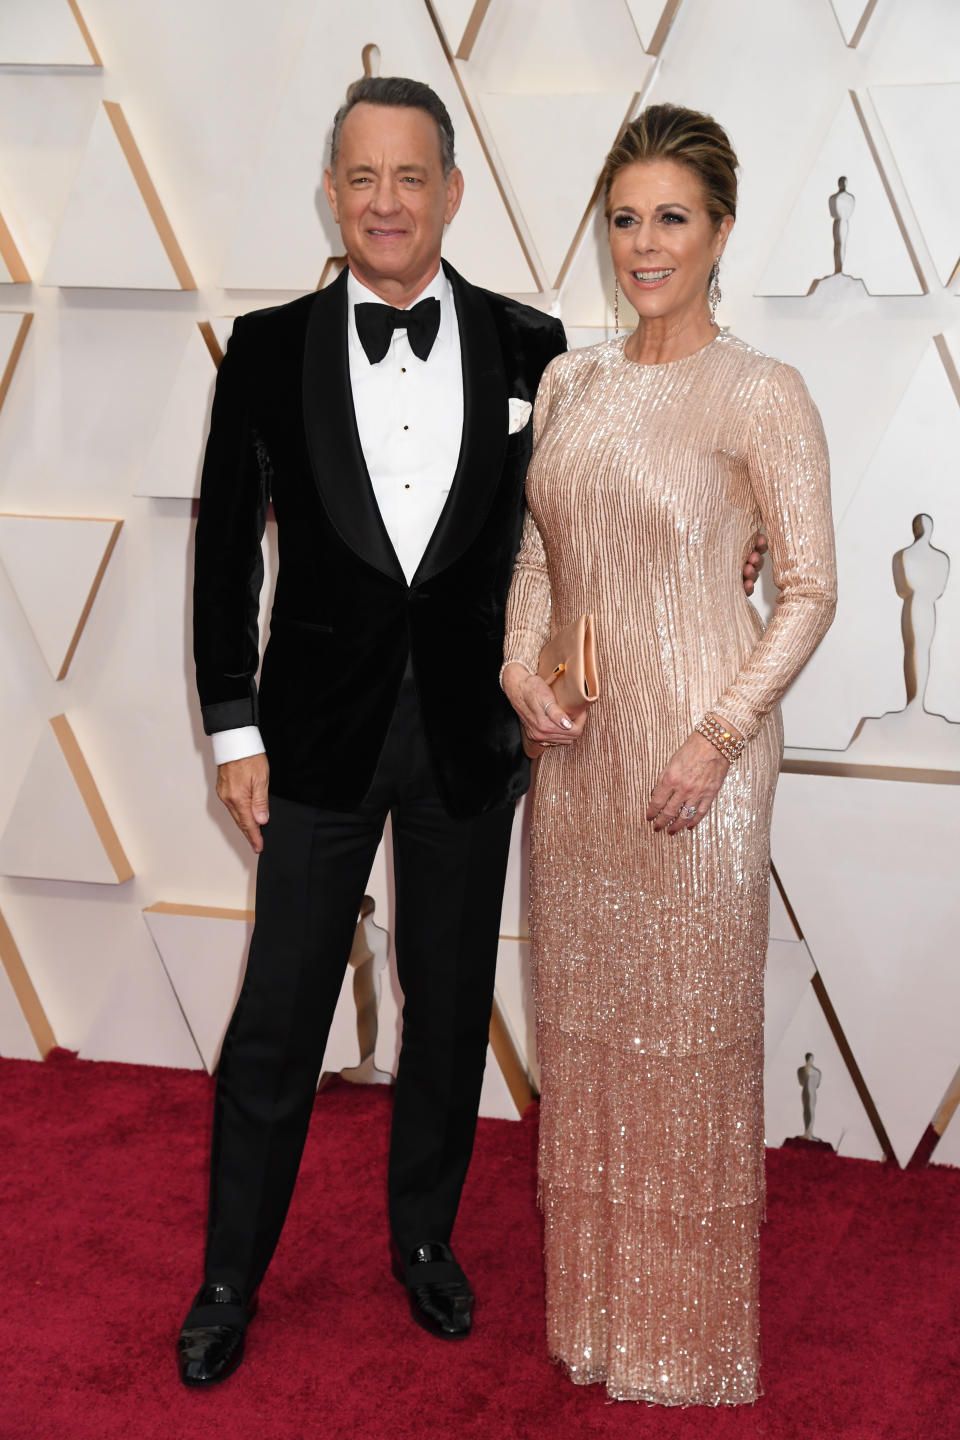 HOLLYWOOD, CALIFORNIA - FEBRUARY 09: (L-R) Tom Hanks and Rita Wilson attend the 92nd Annual Academy Awards at Hollywood and Highland on February 09, 2020 in Hollywood, California. (Photo by Jeff Kravitz/FilmMagic)